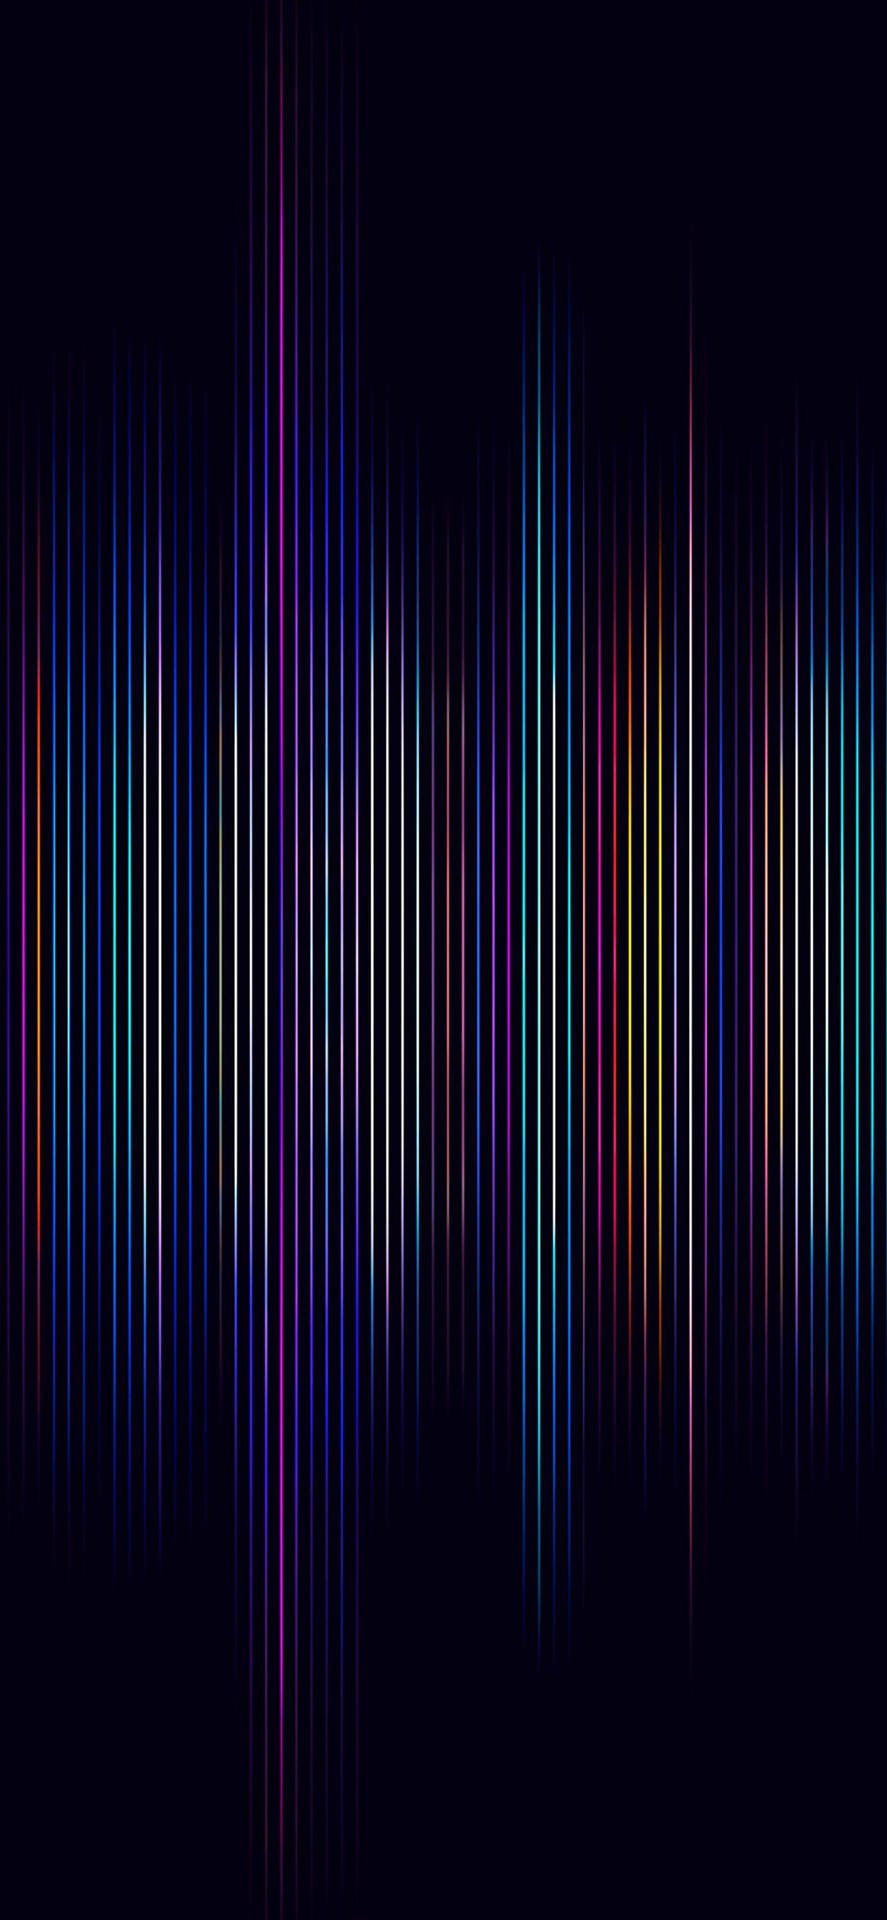 A Colorful Wave Pattern On A Black Background Wallpaper